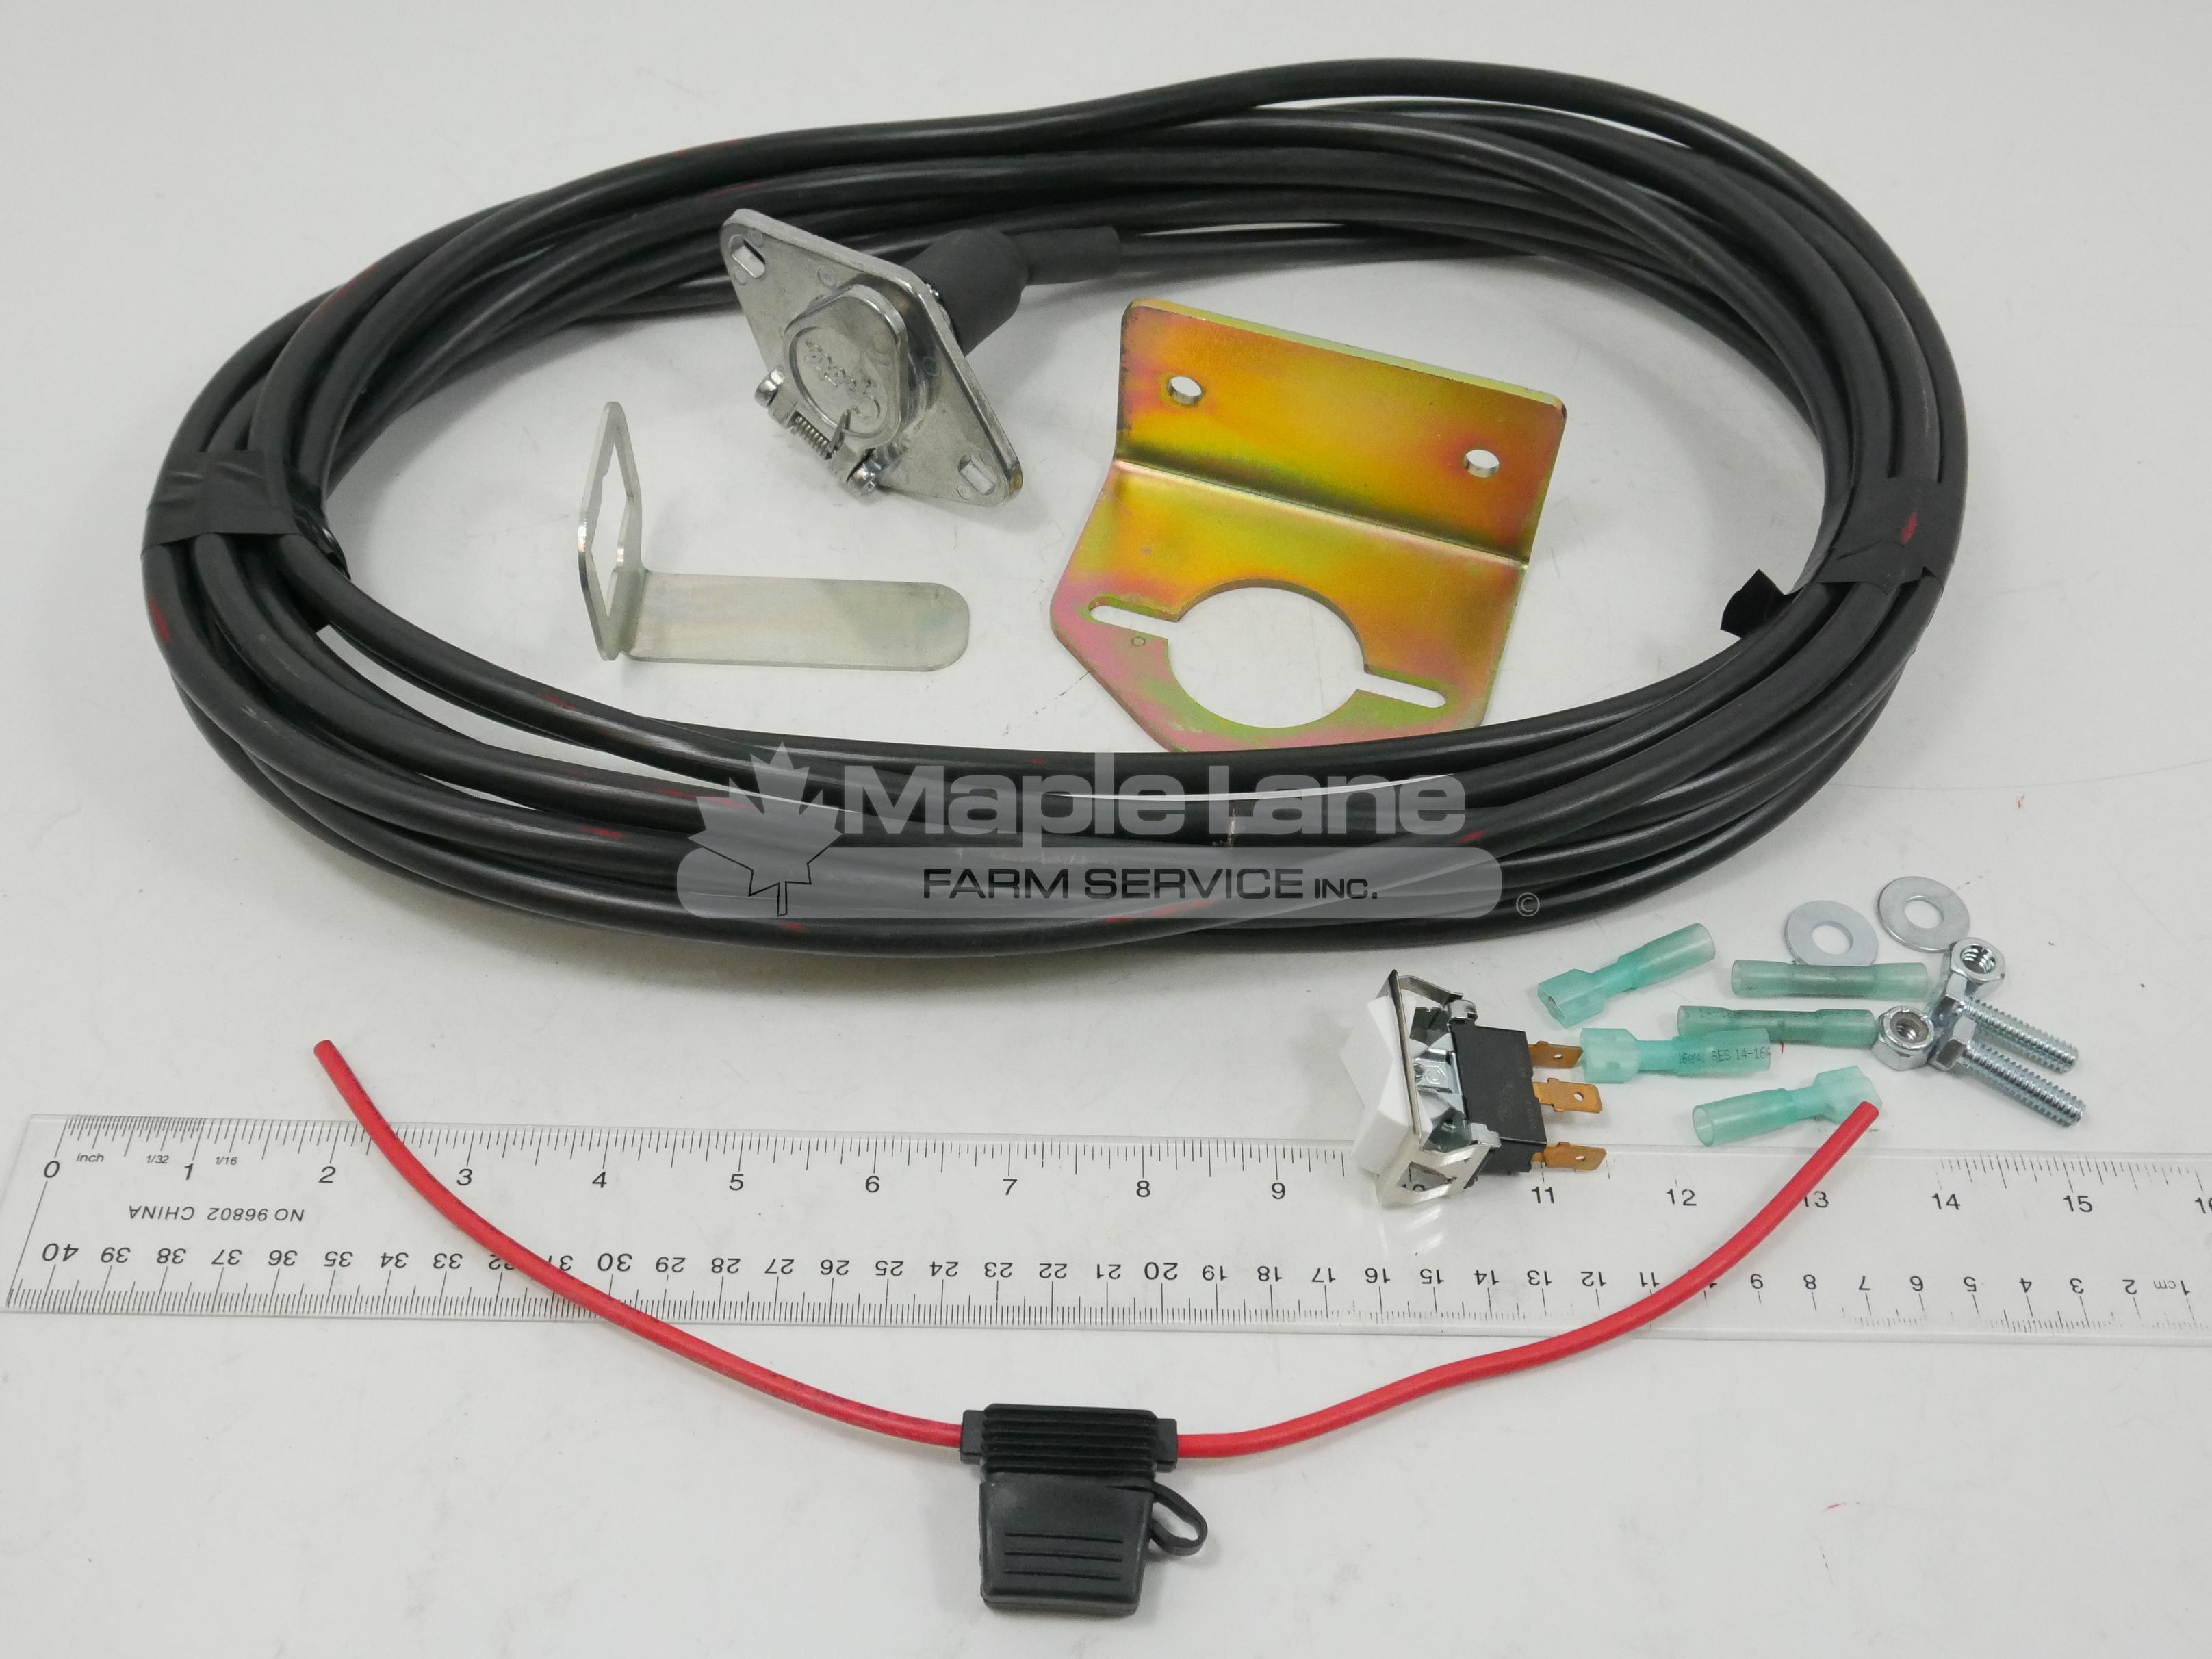 LP-100356 Tractor-Side Wiring